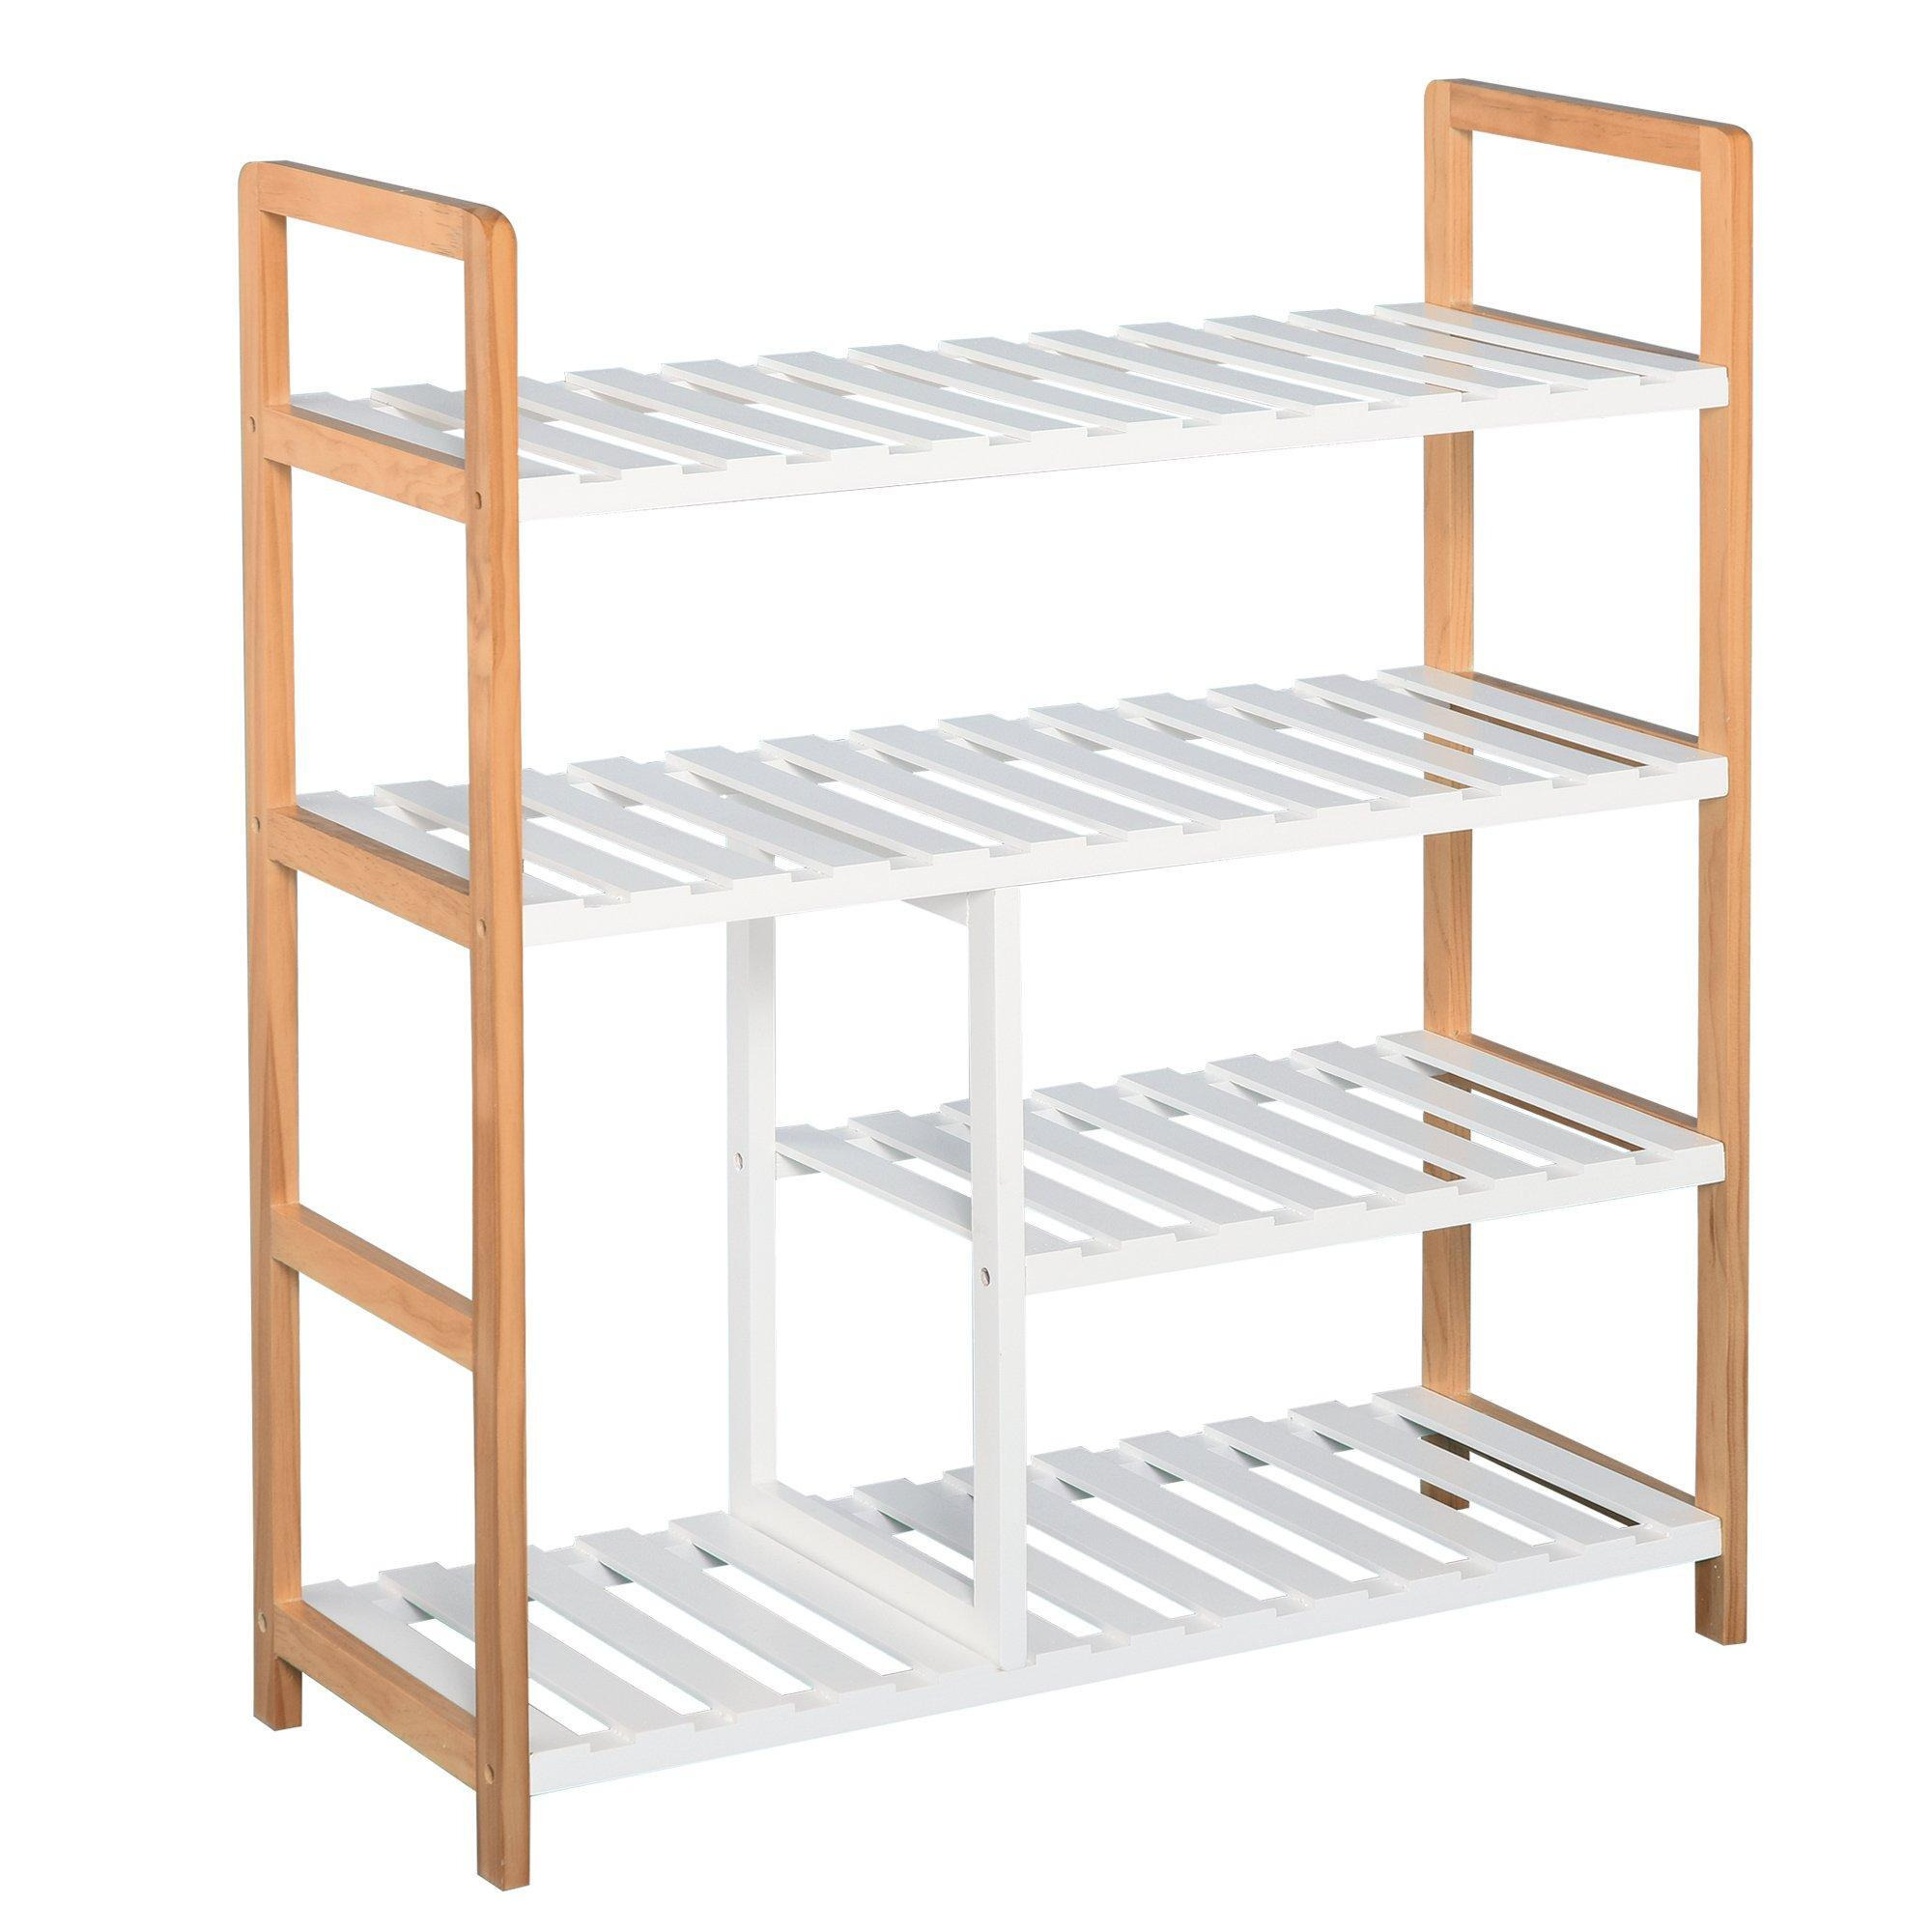 Shoe Rack Simple Home Storage with Wood Frame Boot Compartment - image 1